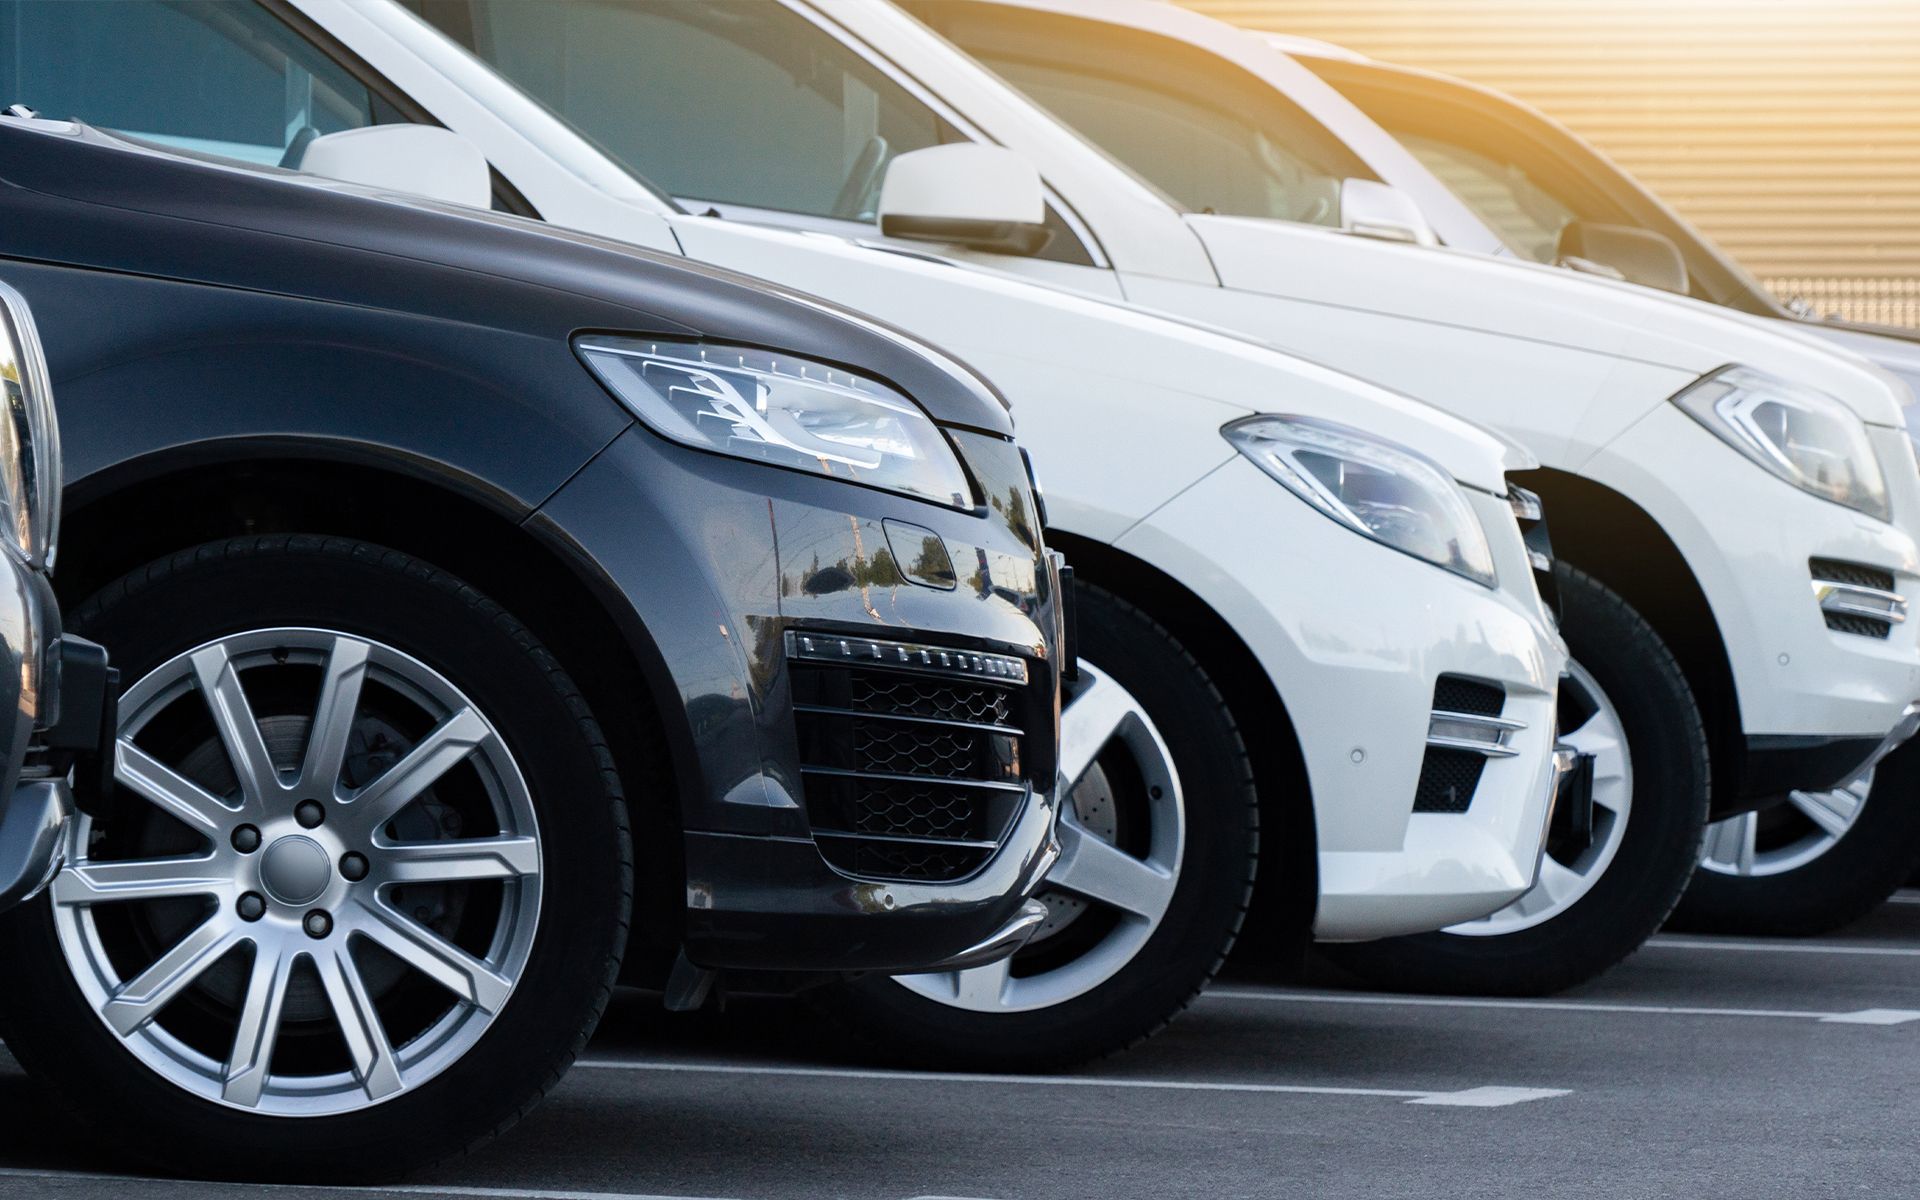 The Benefits of Choosing a Dilawri Certified Pre-Owned Vehicle